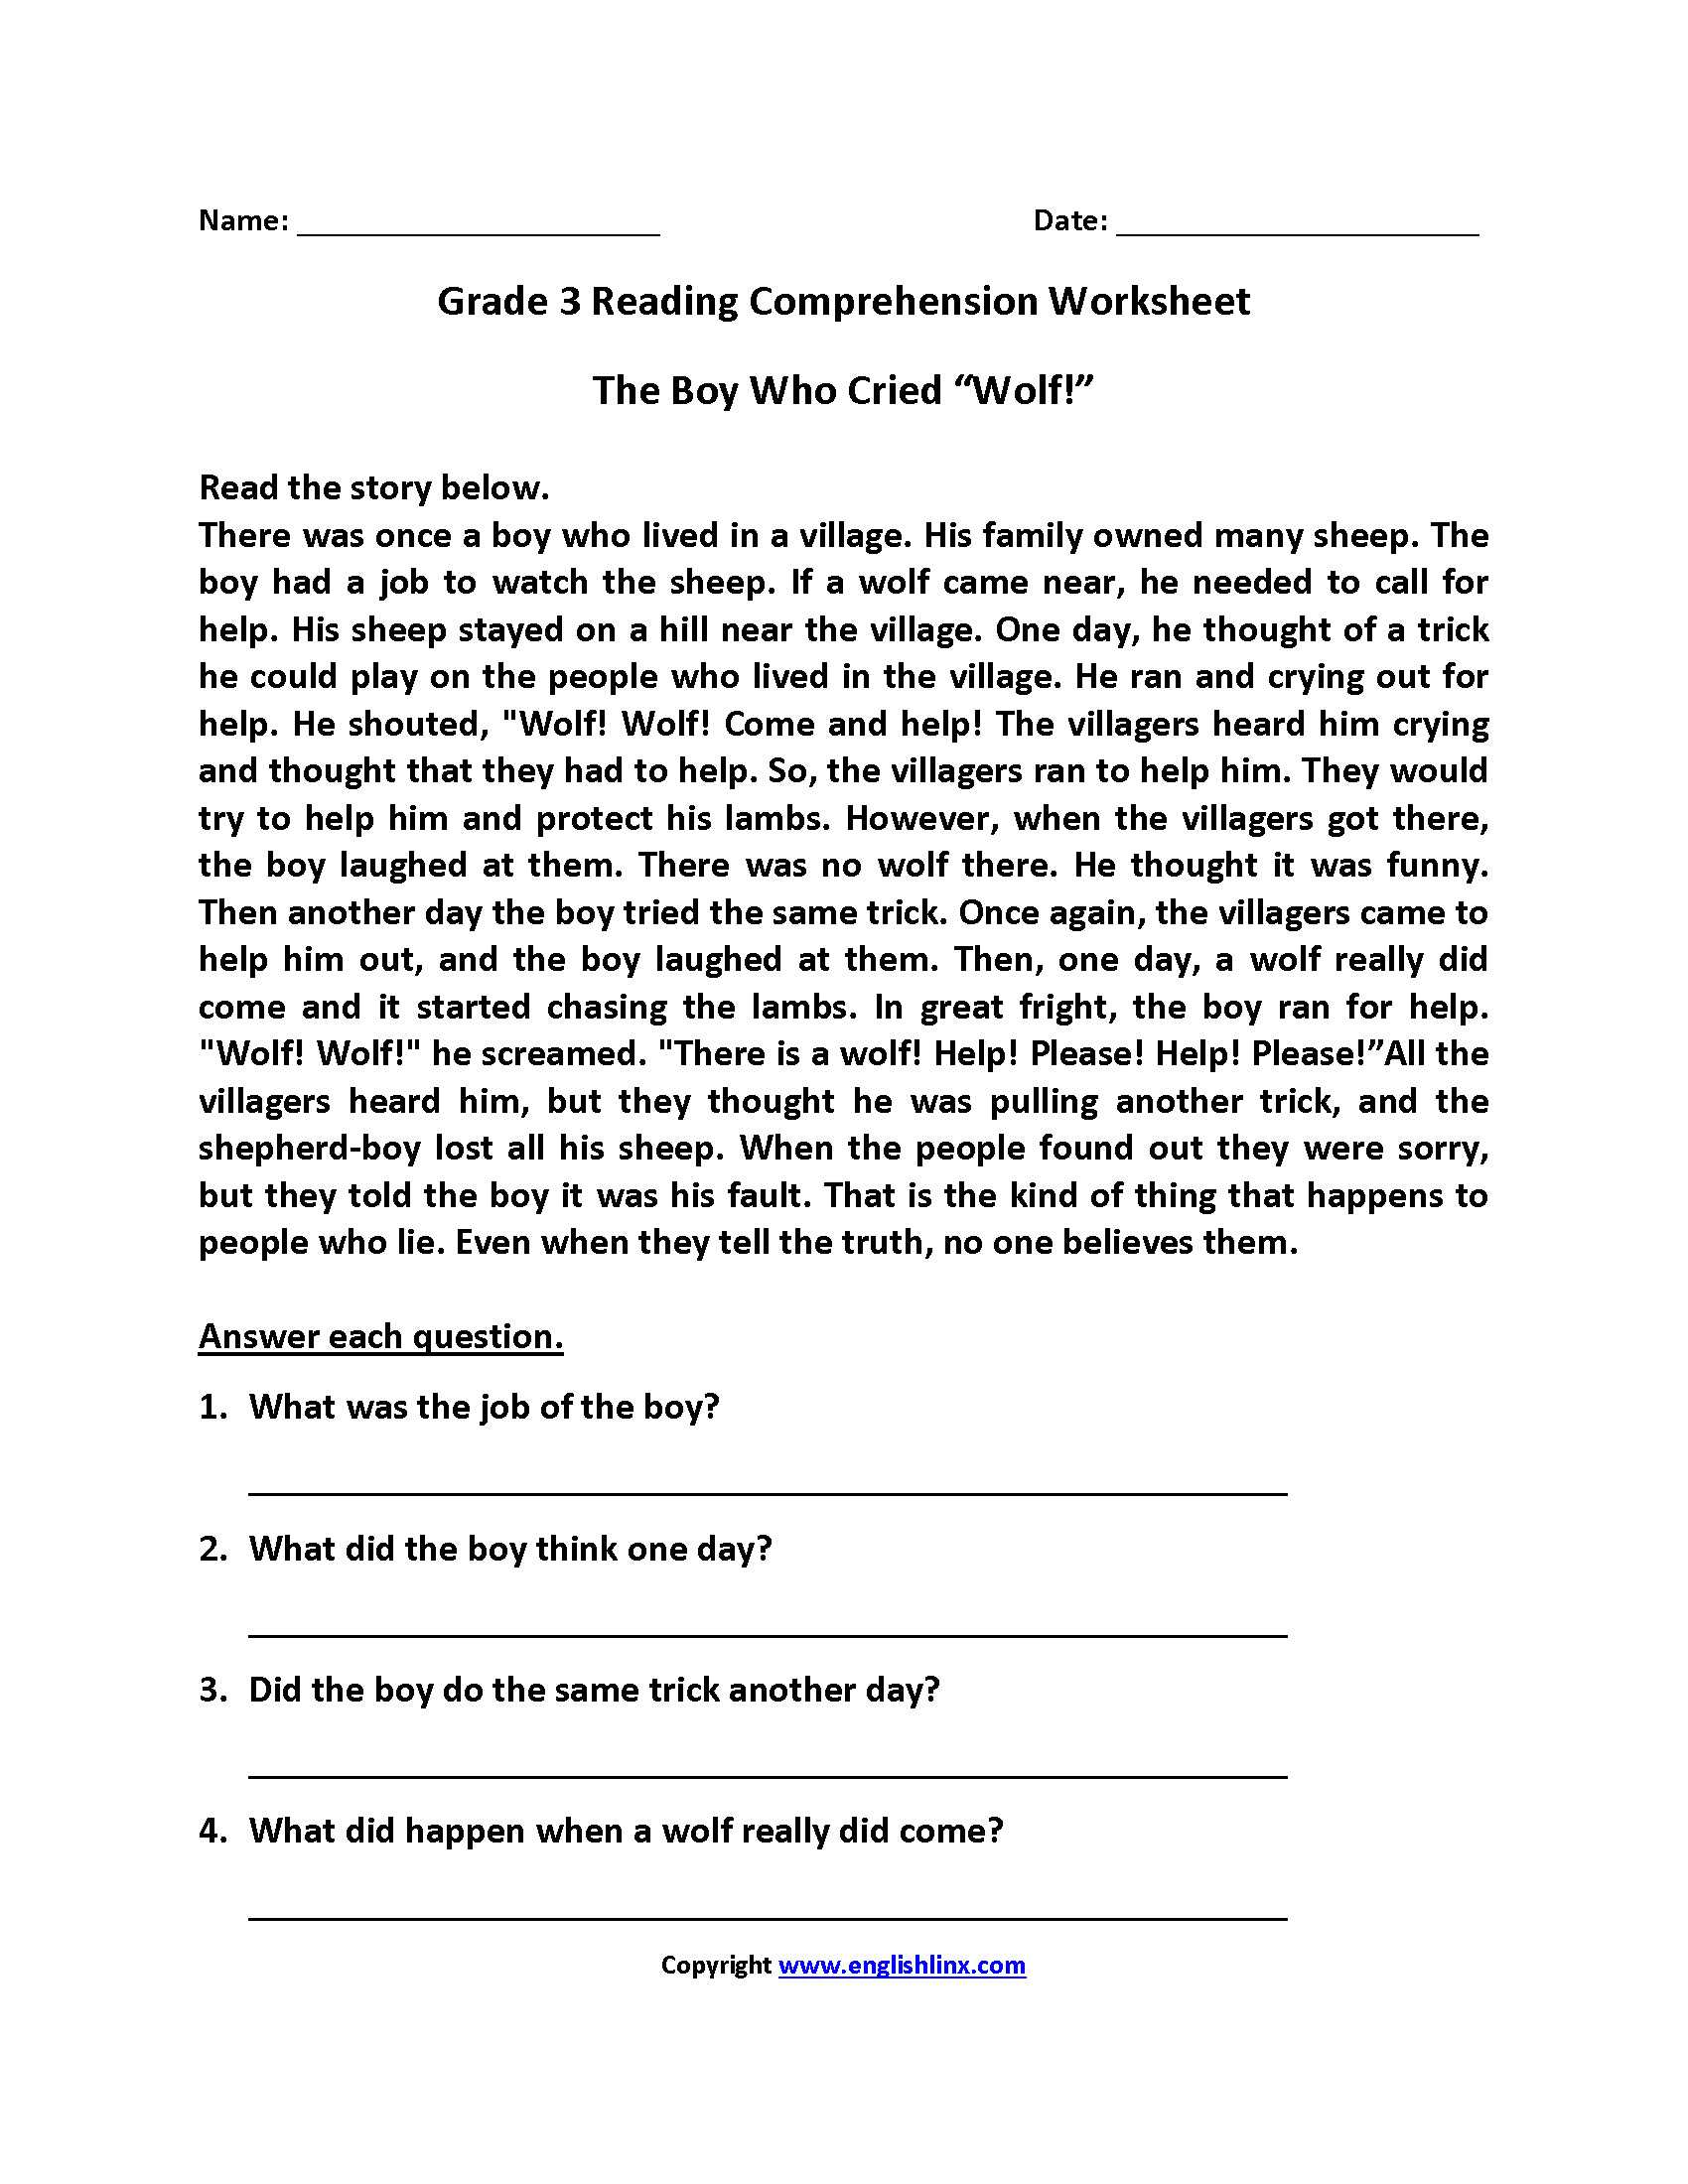 Reading Comprehension Main Idea Worksheets together with English Worksheets About Christmas Beautiful Guess the Christmas